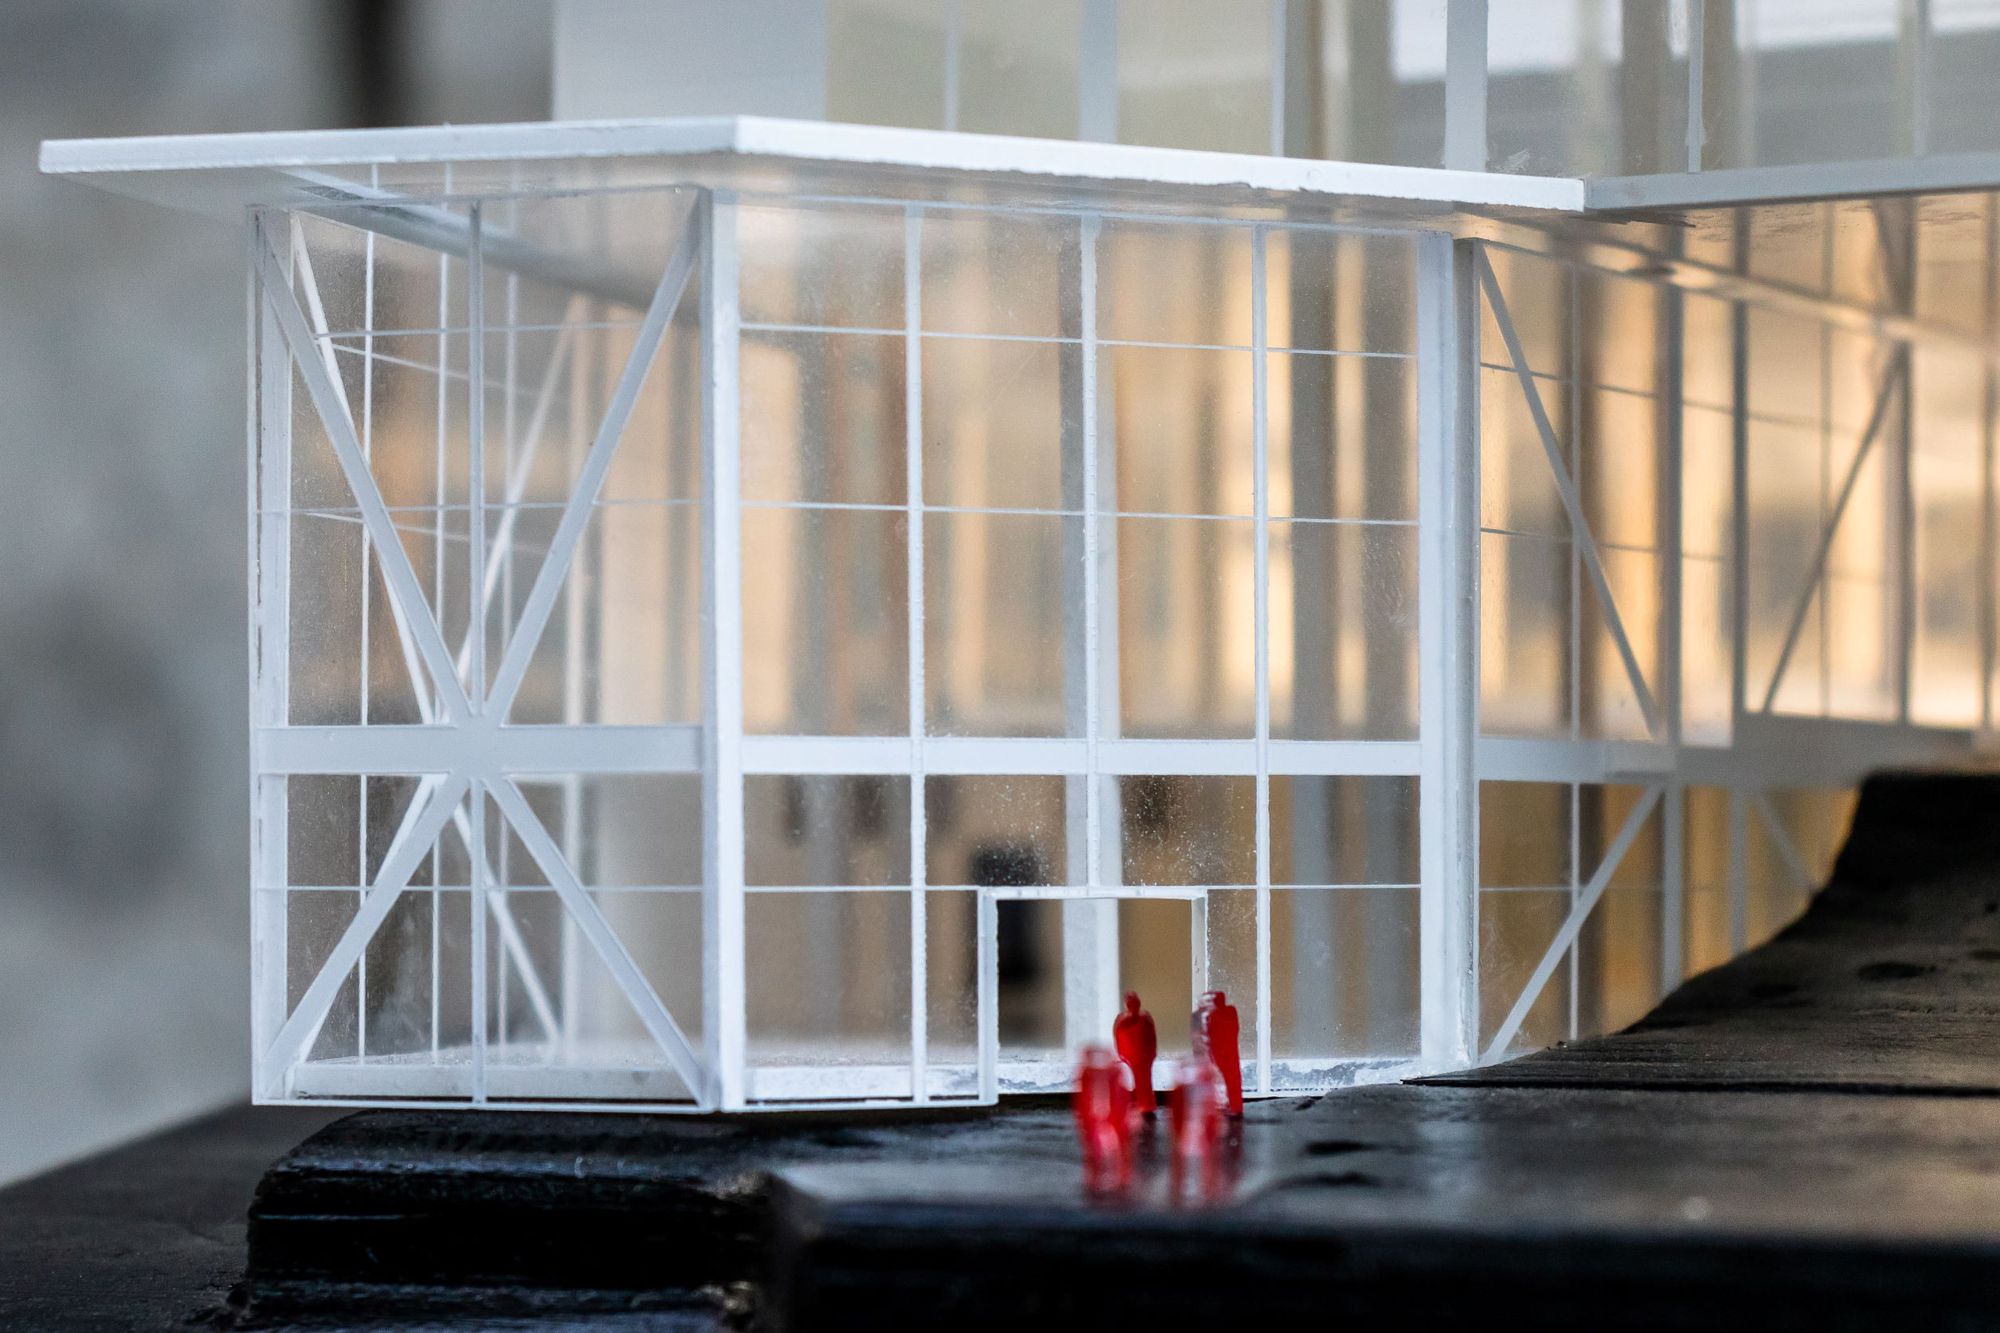 Making of this Acrylic Library Model